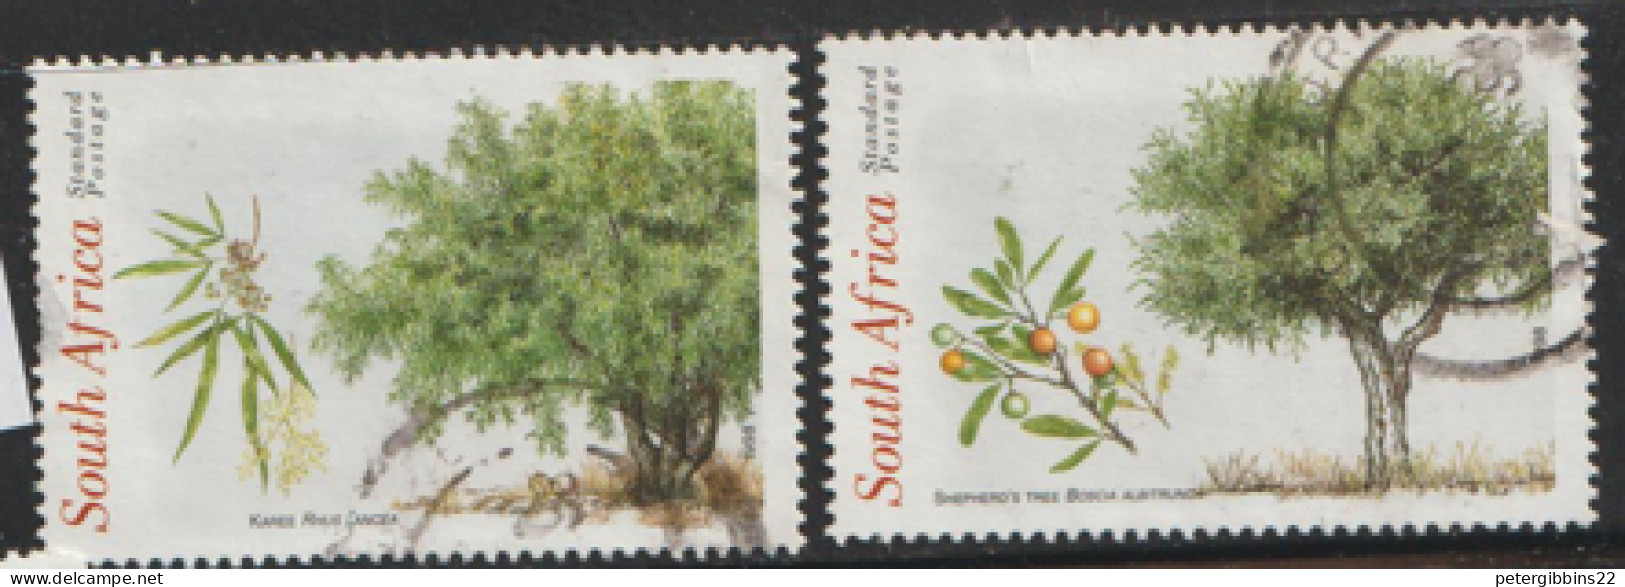 South Africa 1998  SG  1080-1   Trees    Fine Used - Used Stamps